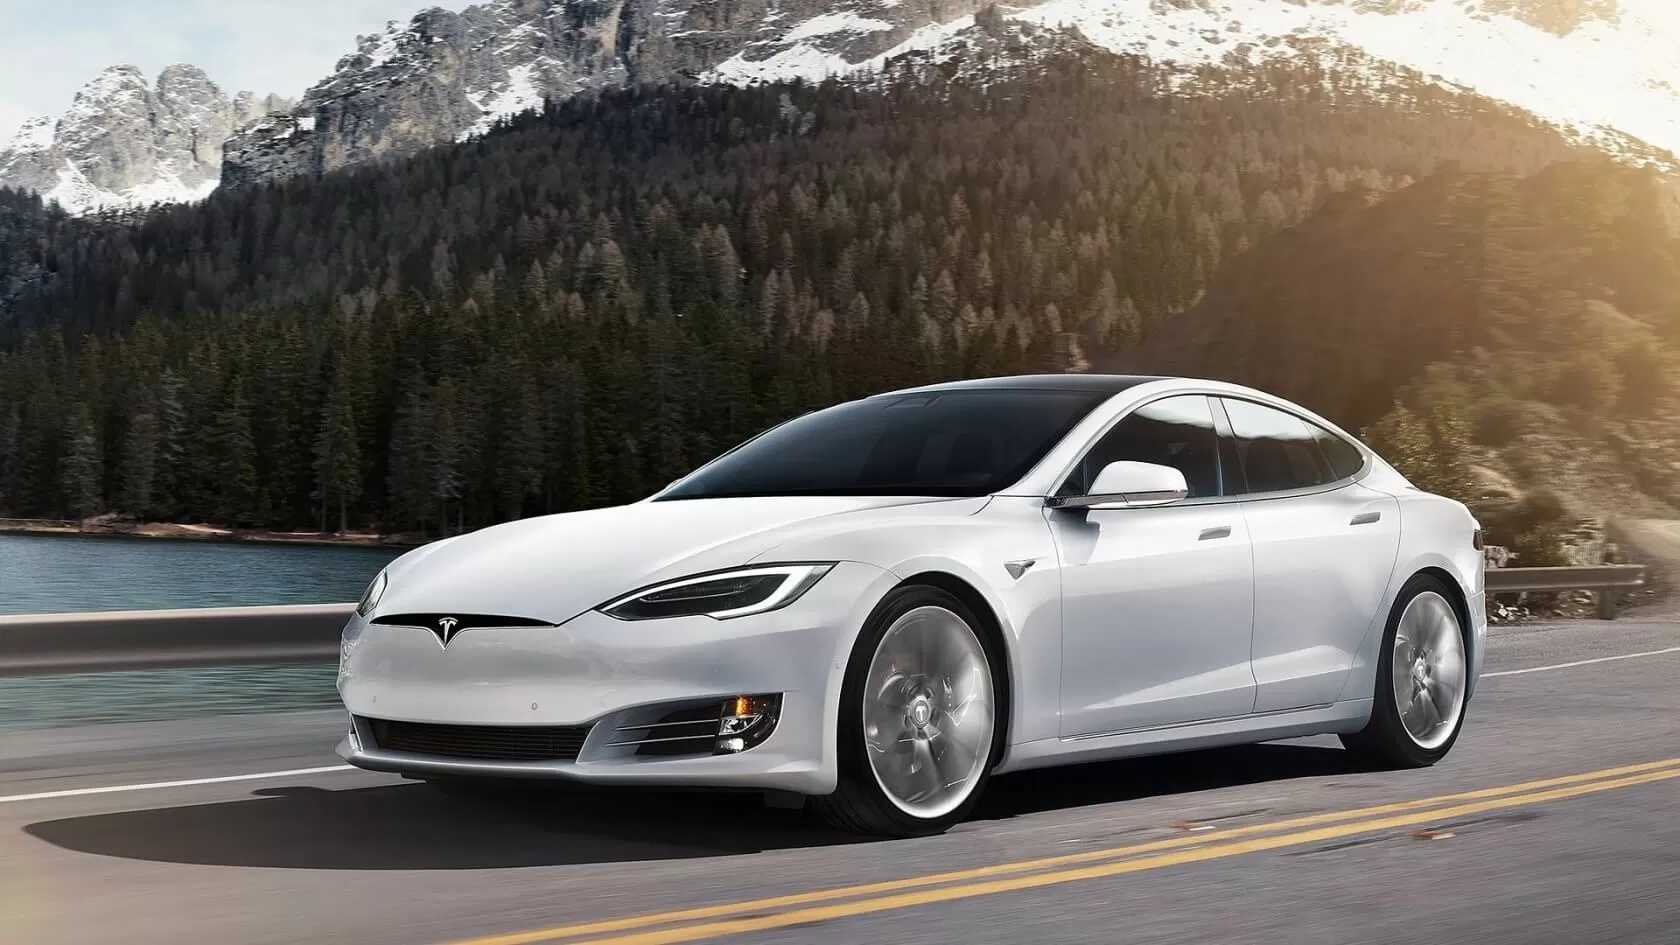 Tesla is refreshing the Model S and Model X with new motors and longer range